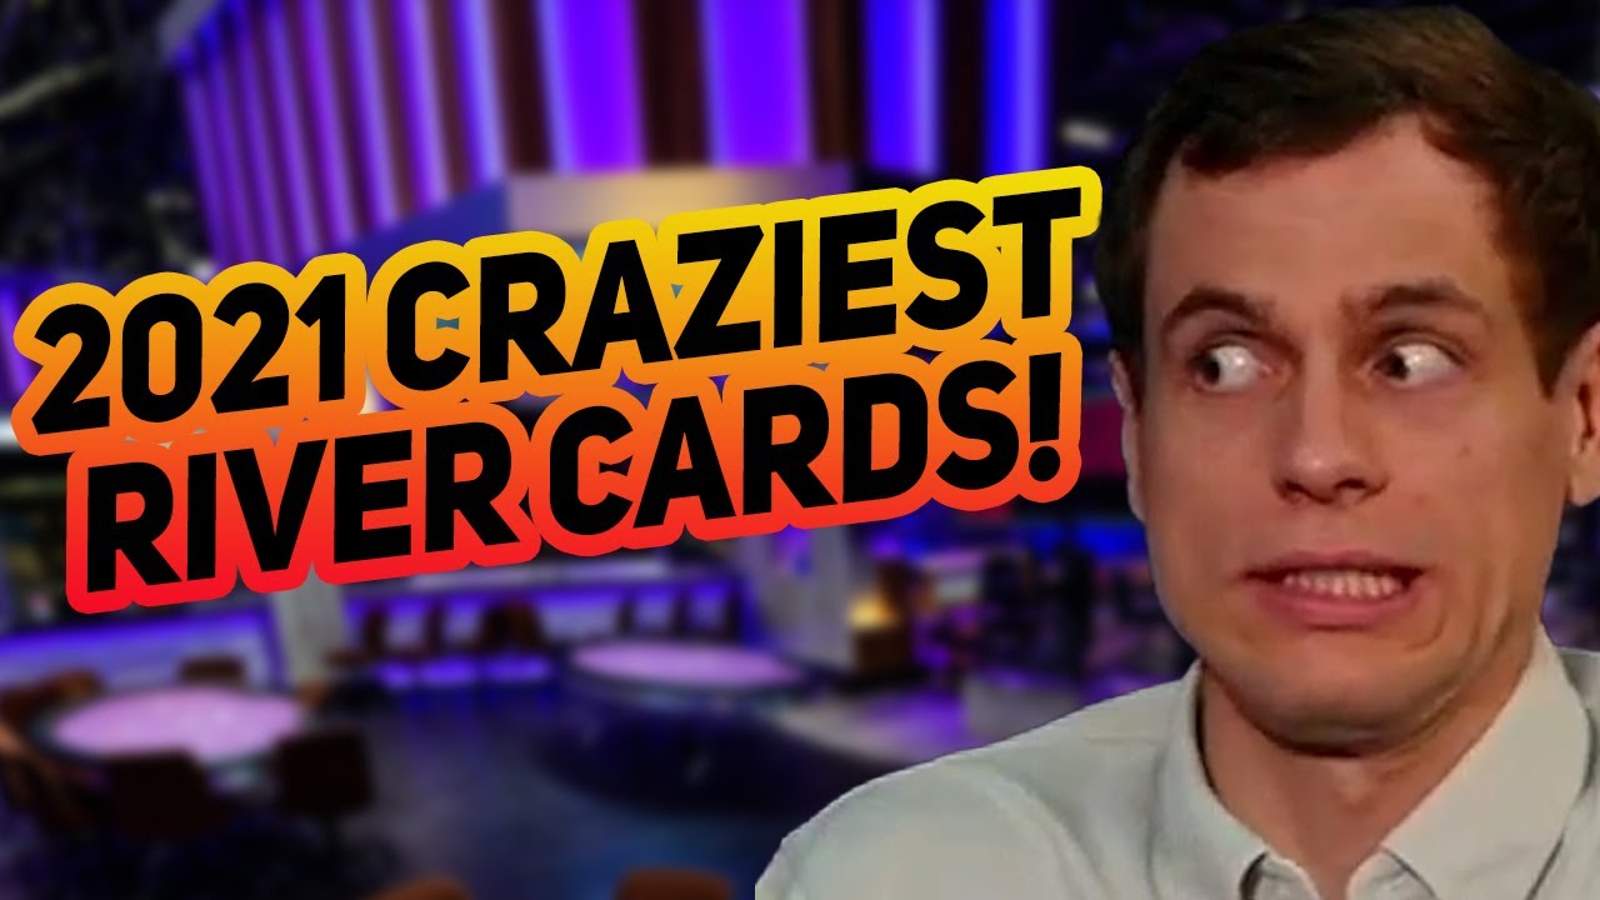 2021 Best Poker Hands: Craziest River Cards of the Year